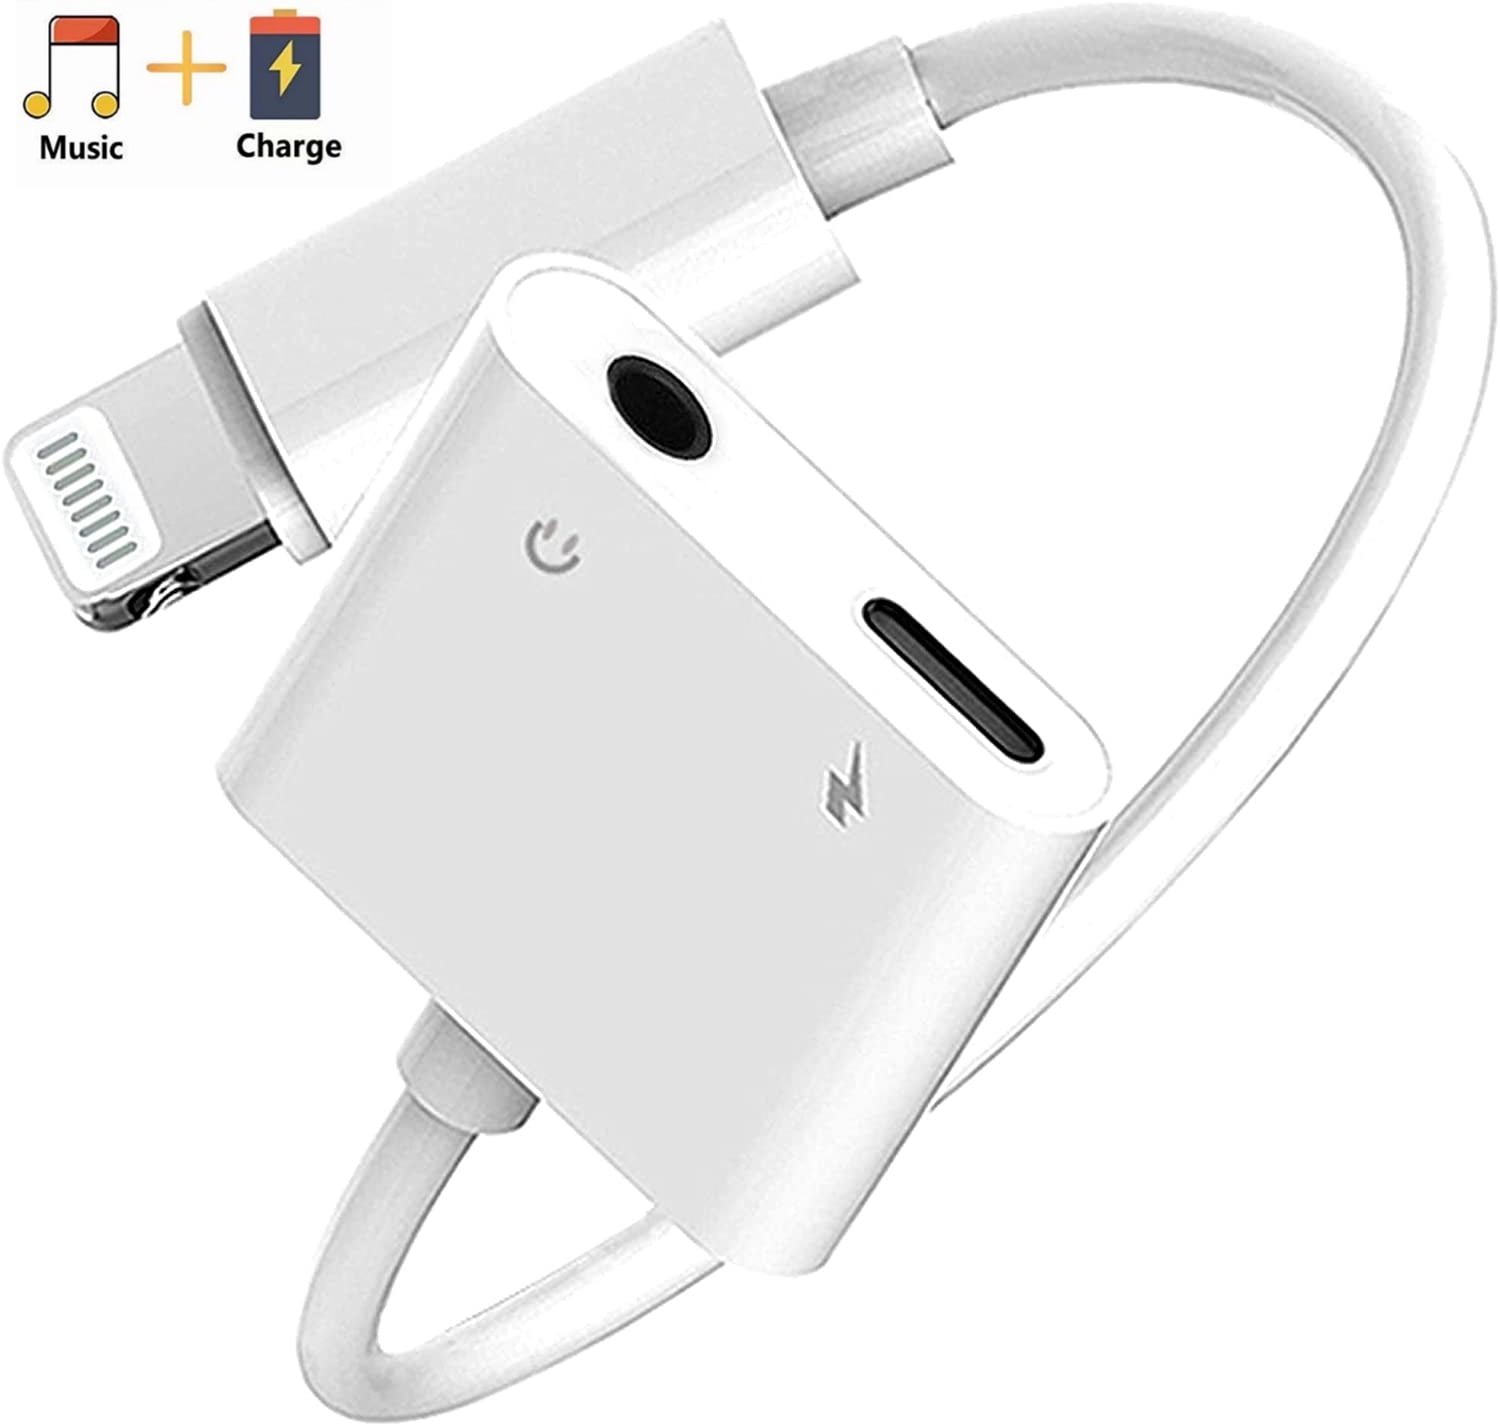 Headphones Adapter for iPhone 11 Jack 3.5mm Aux Audio Splitter Dongle Earphone Cable for iPhone 11 Pro//Xs//Xr//X//8 Plus//8//7 Plus//7 Headsets Accessories Cable Connector Support All iOS Systems-White